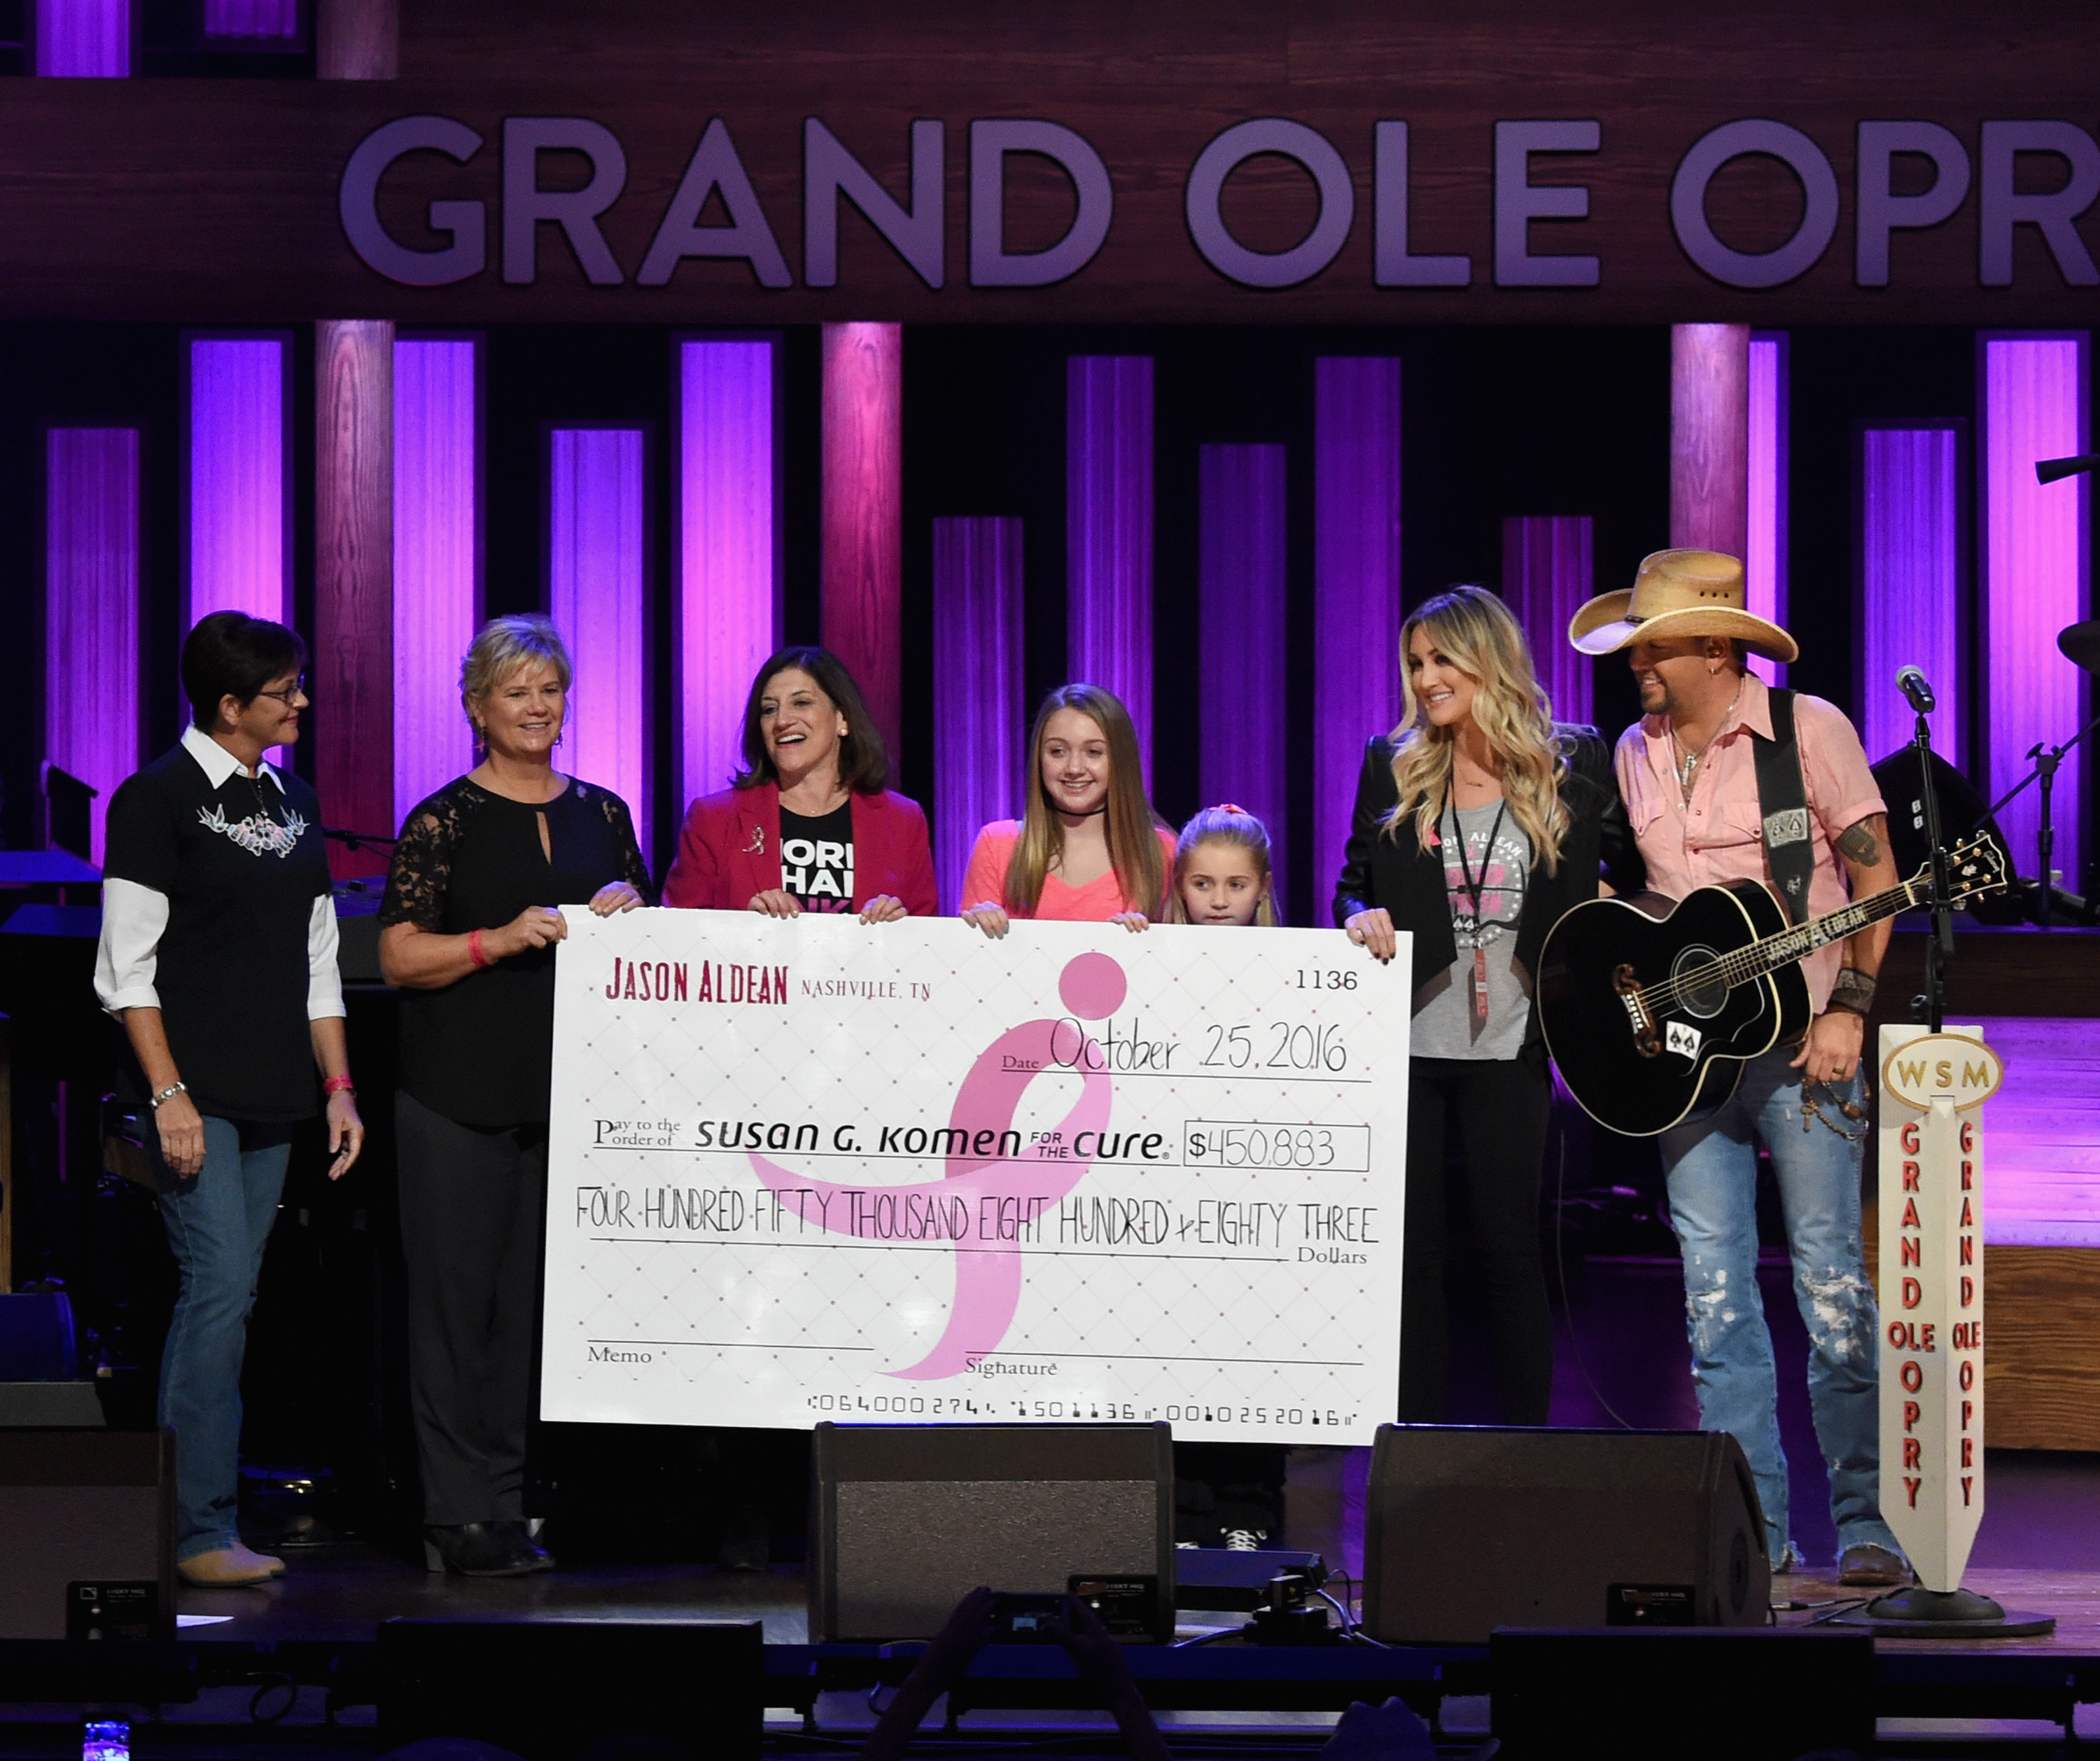 Pam Martin, Patty Harman, Susan G. Komen, Dr. Judy Salerno, Aldean's daughters Keeley and Kendyl, Brittany Aldean, and Jason Aldean at "CONCERT FOR THE CURE" on October 25, 2016, in Nashville, Tennessee. | Source: Getty Images